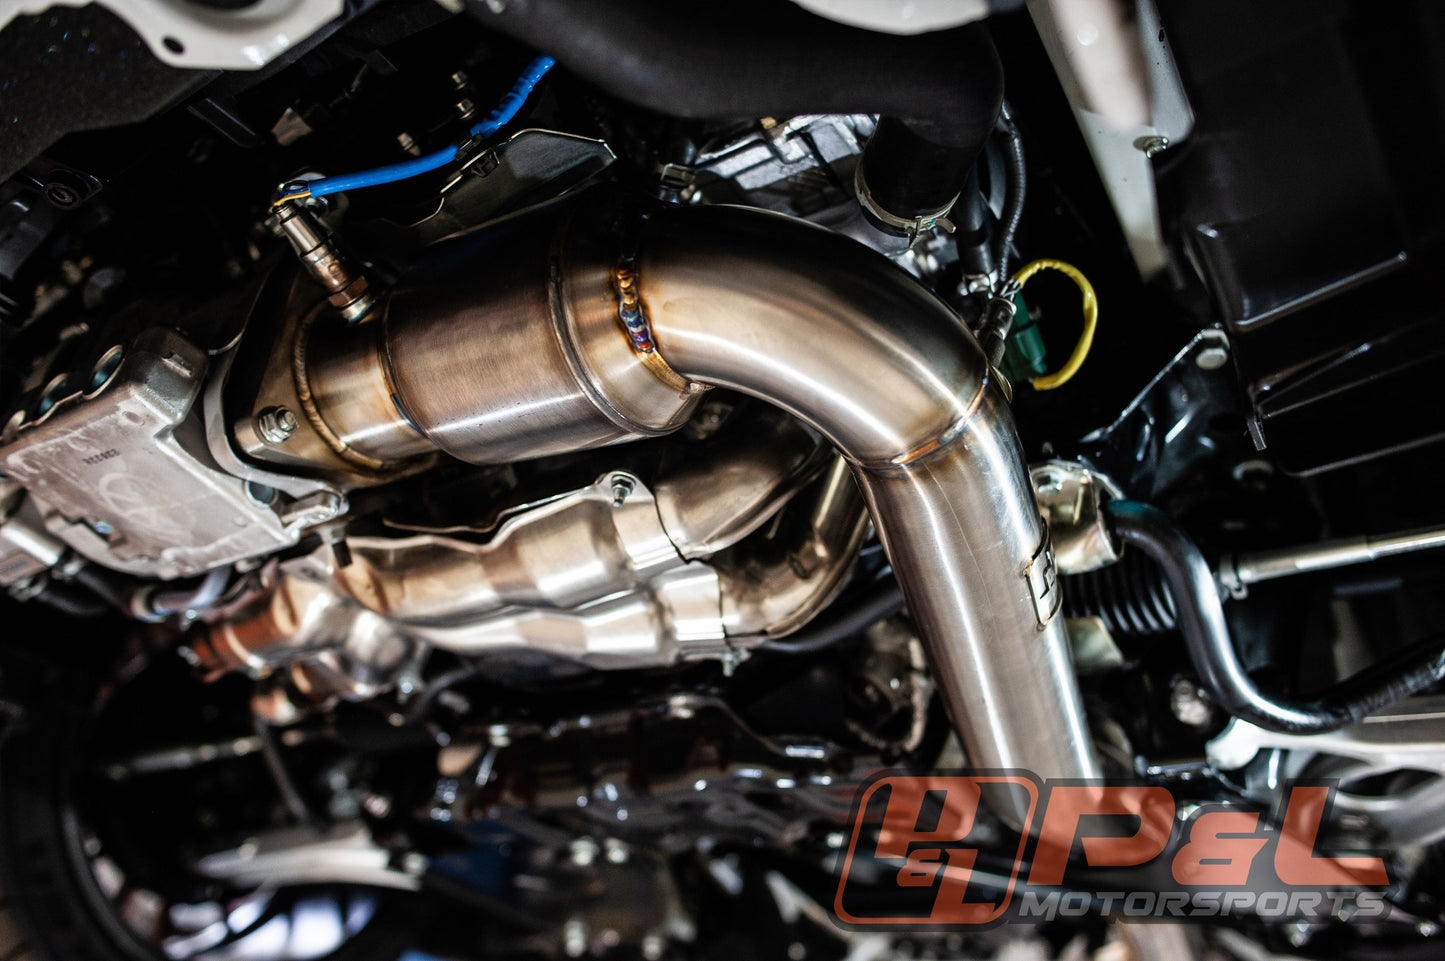 P&L Motorsports 22-24 WRX MT GESI Catted J-Pipe